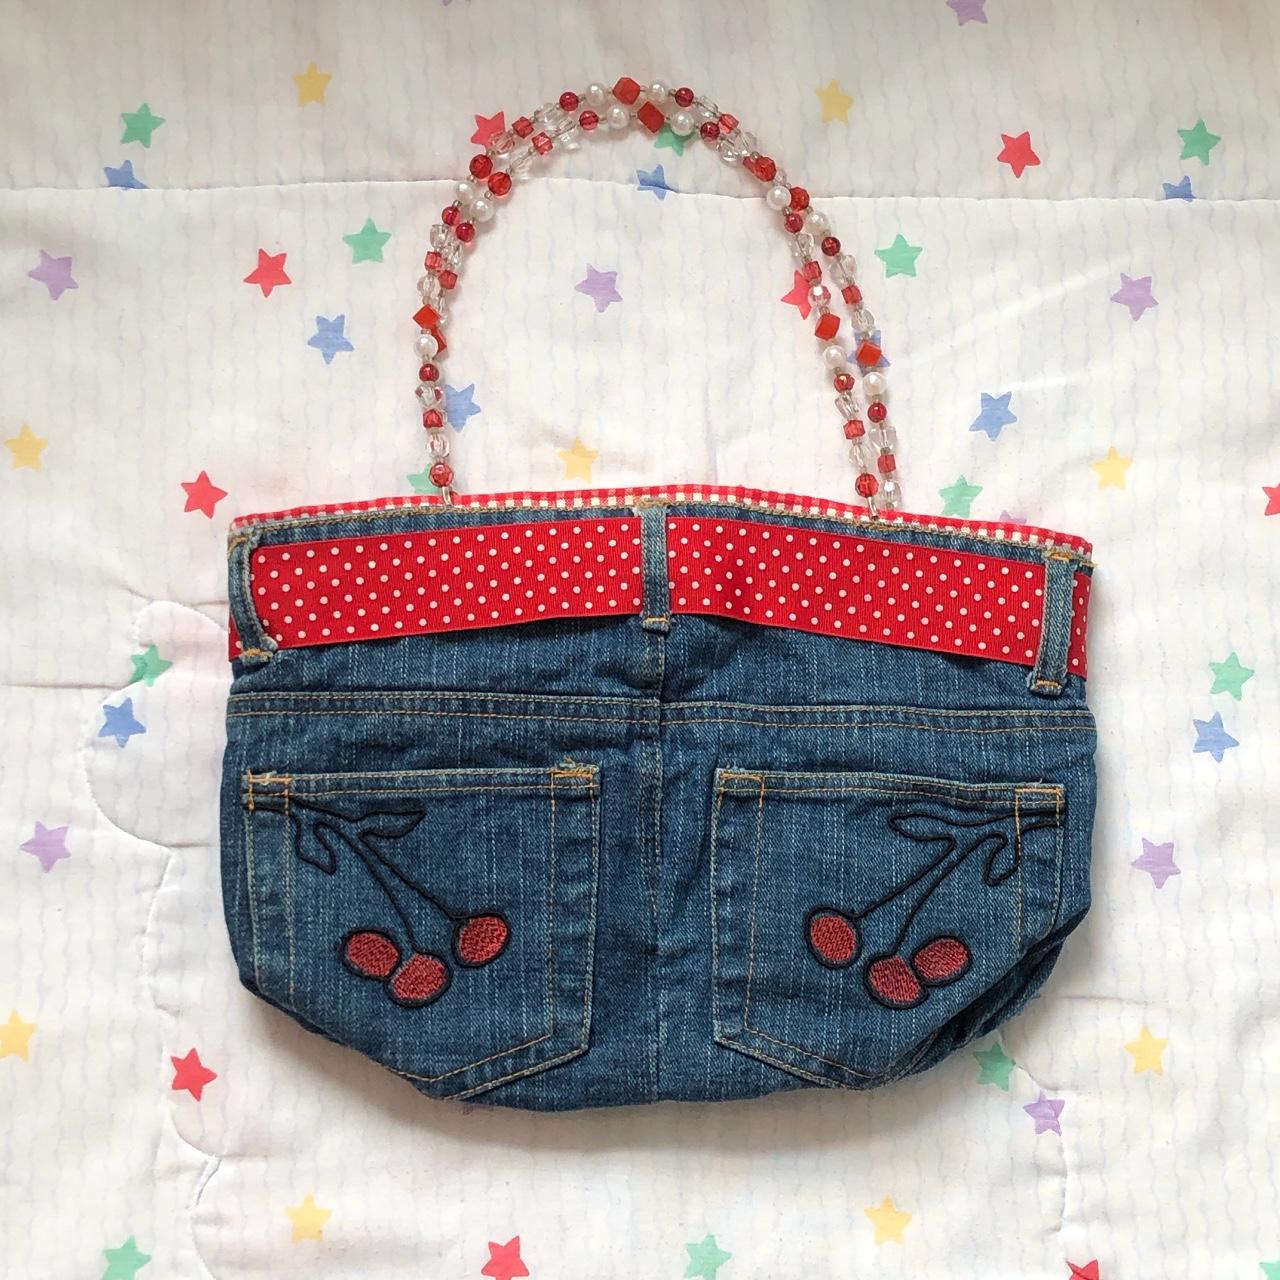 Women's Blue and Red Bag | Depop